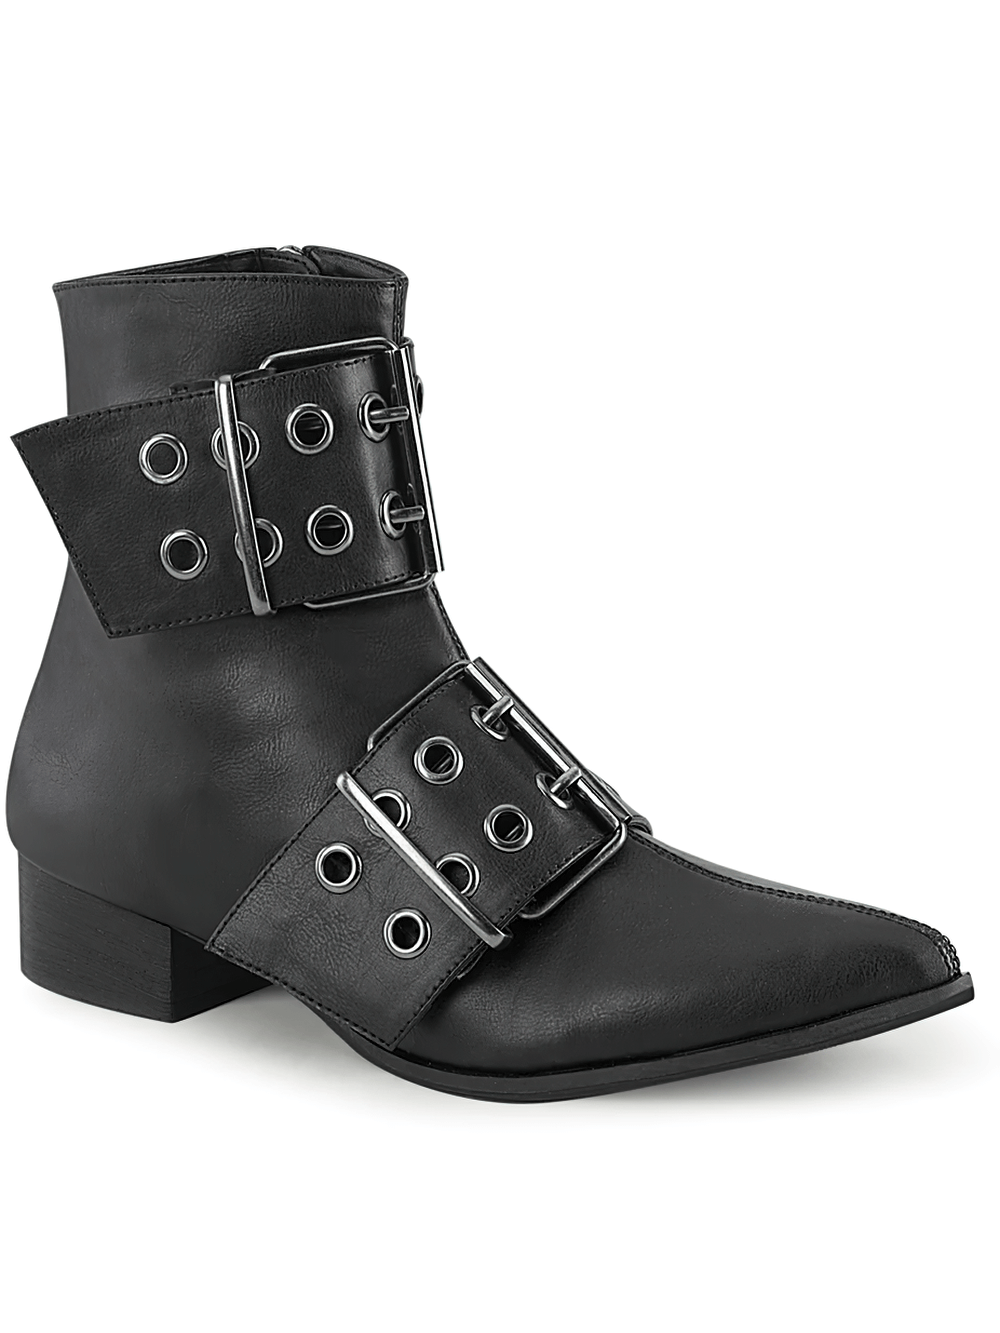 DEMONIA Black Pointed Toe Ankle Boots with Straps